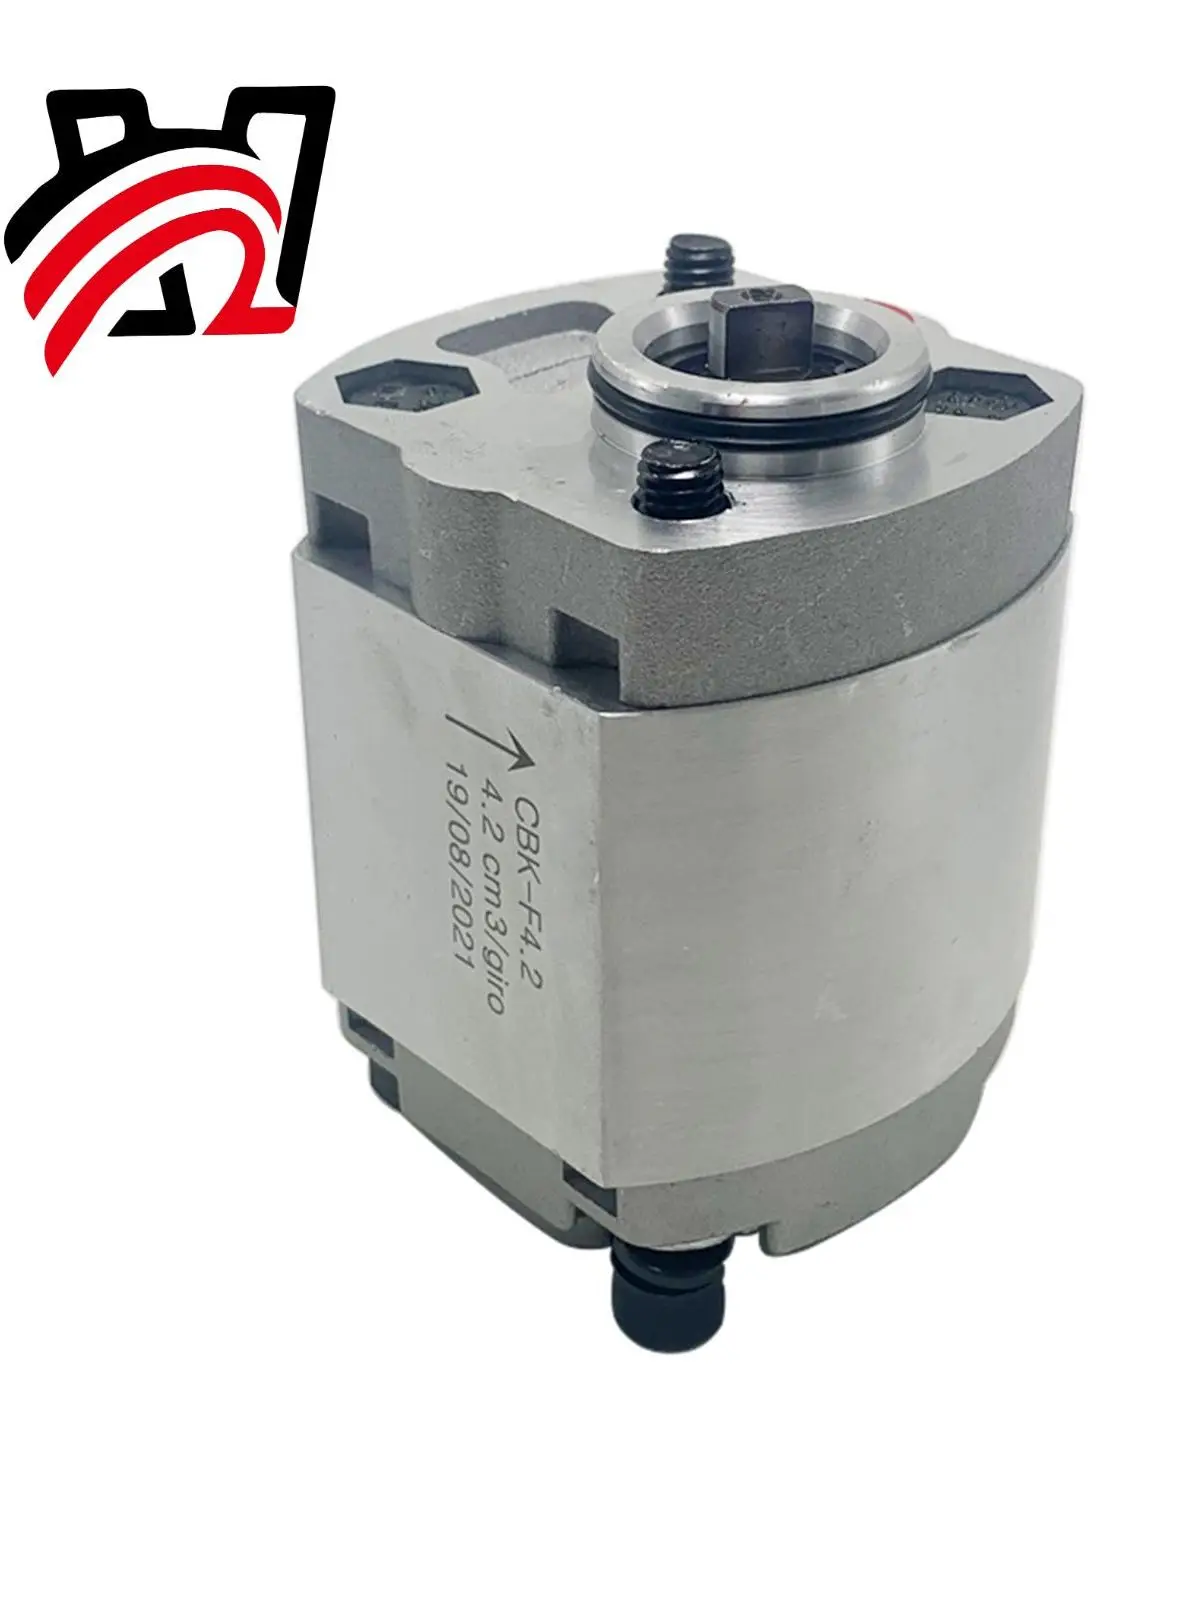 

Hydraulic gear pump CBK booster pump applied for direct sales in environmental sanitation vehicle factories